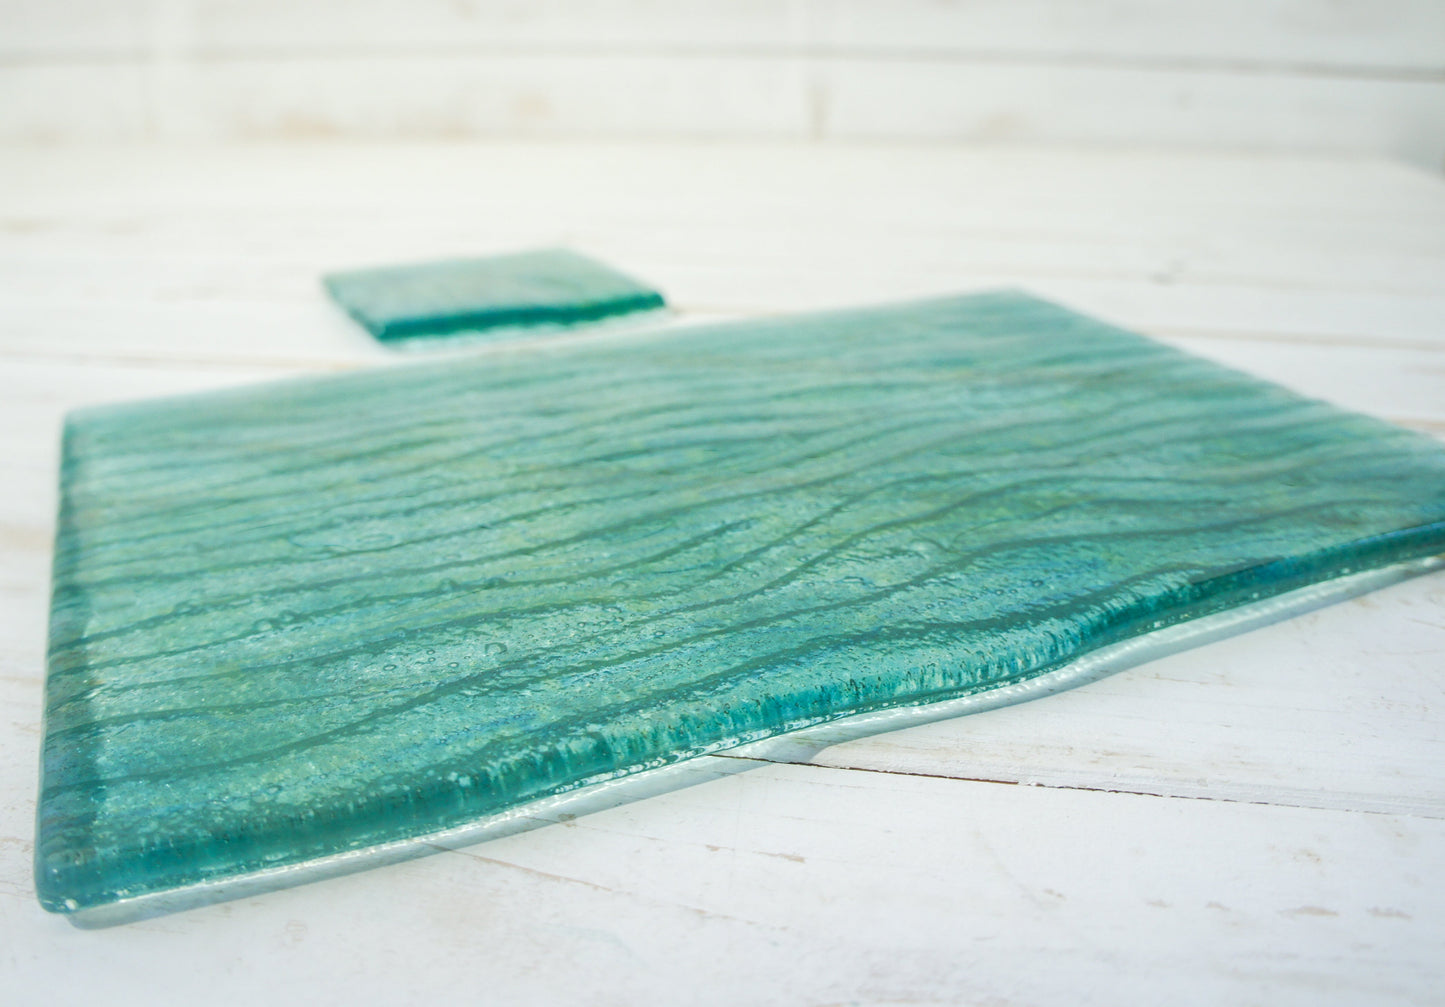 Seabed Turquoise Placemat 30x20cm(11 3/4 x 8 1/4")